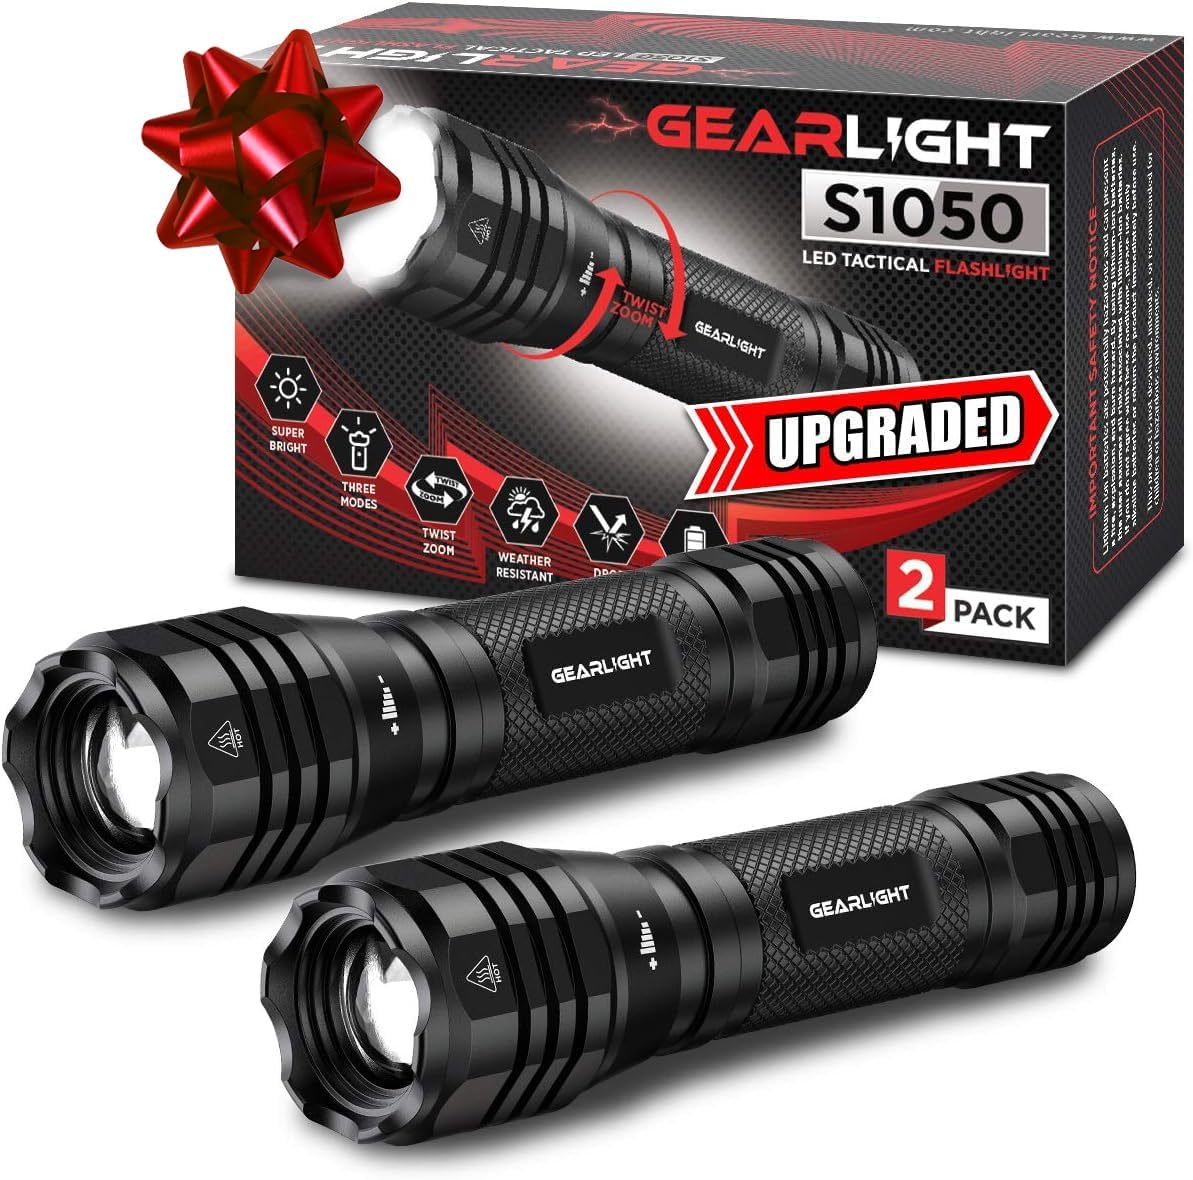 GearLight S1050 LED Flashlight Review